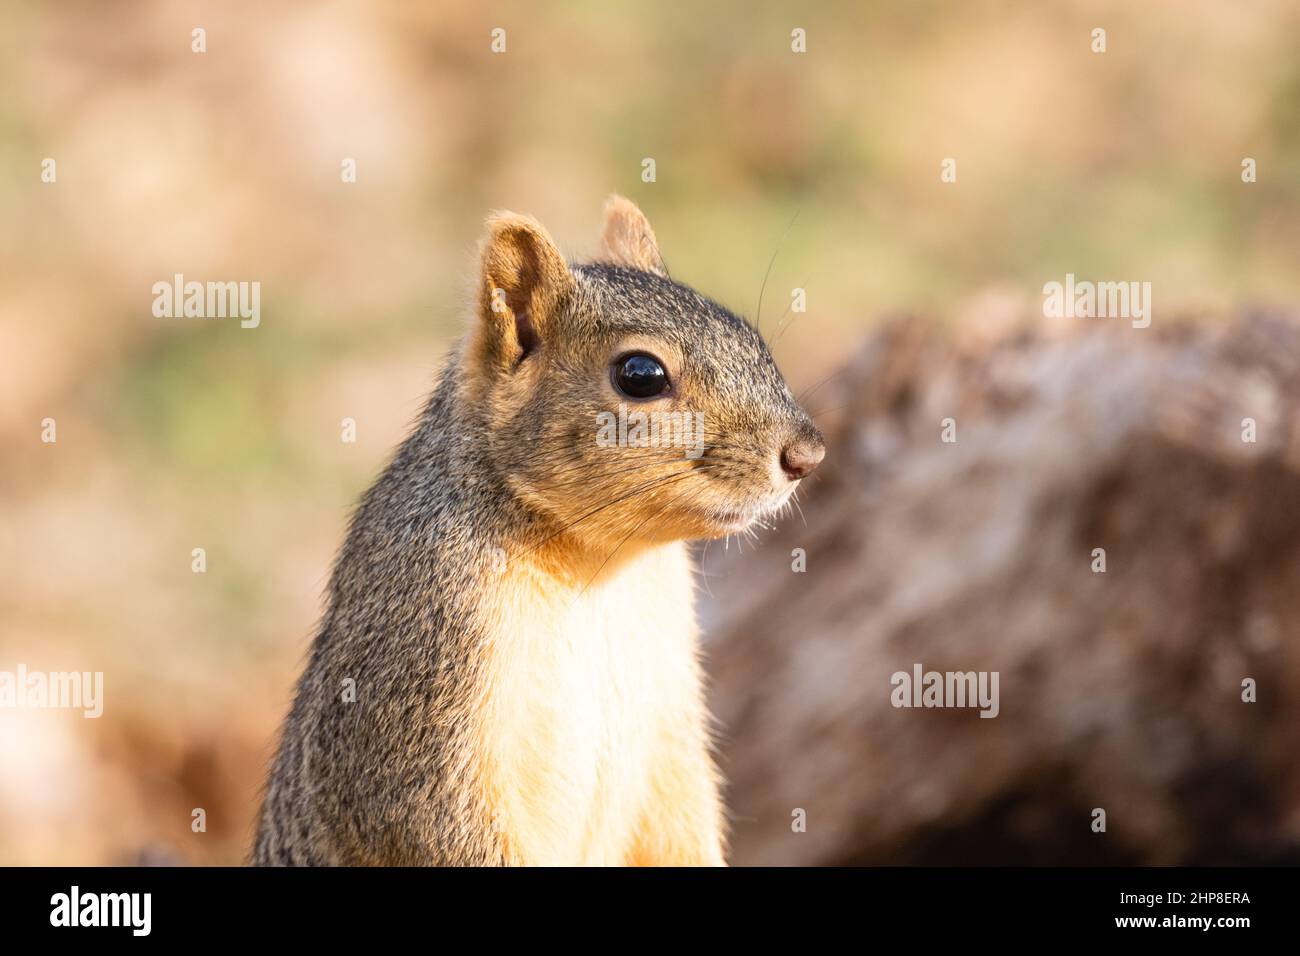 Common Eastern Grey Squirrel Sciurus carolinensi close-up. Frequent visitors or residents to backyards and parks. Stock Photo